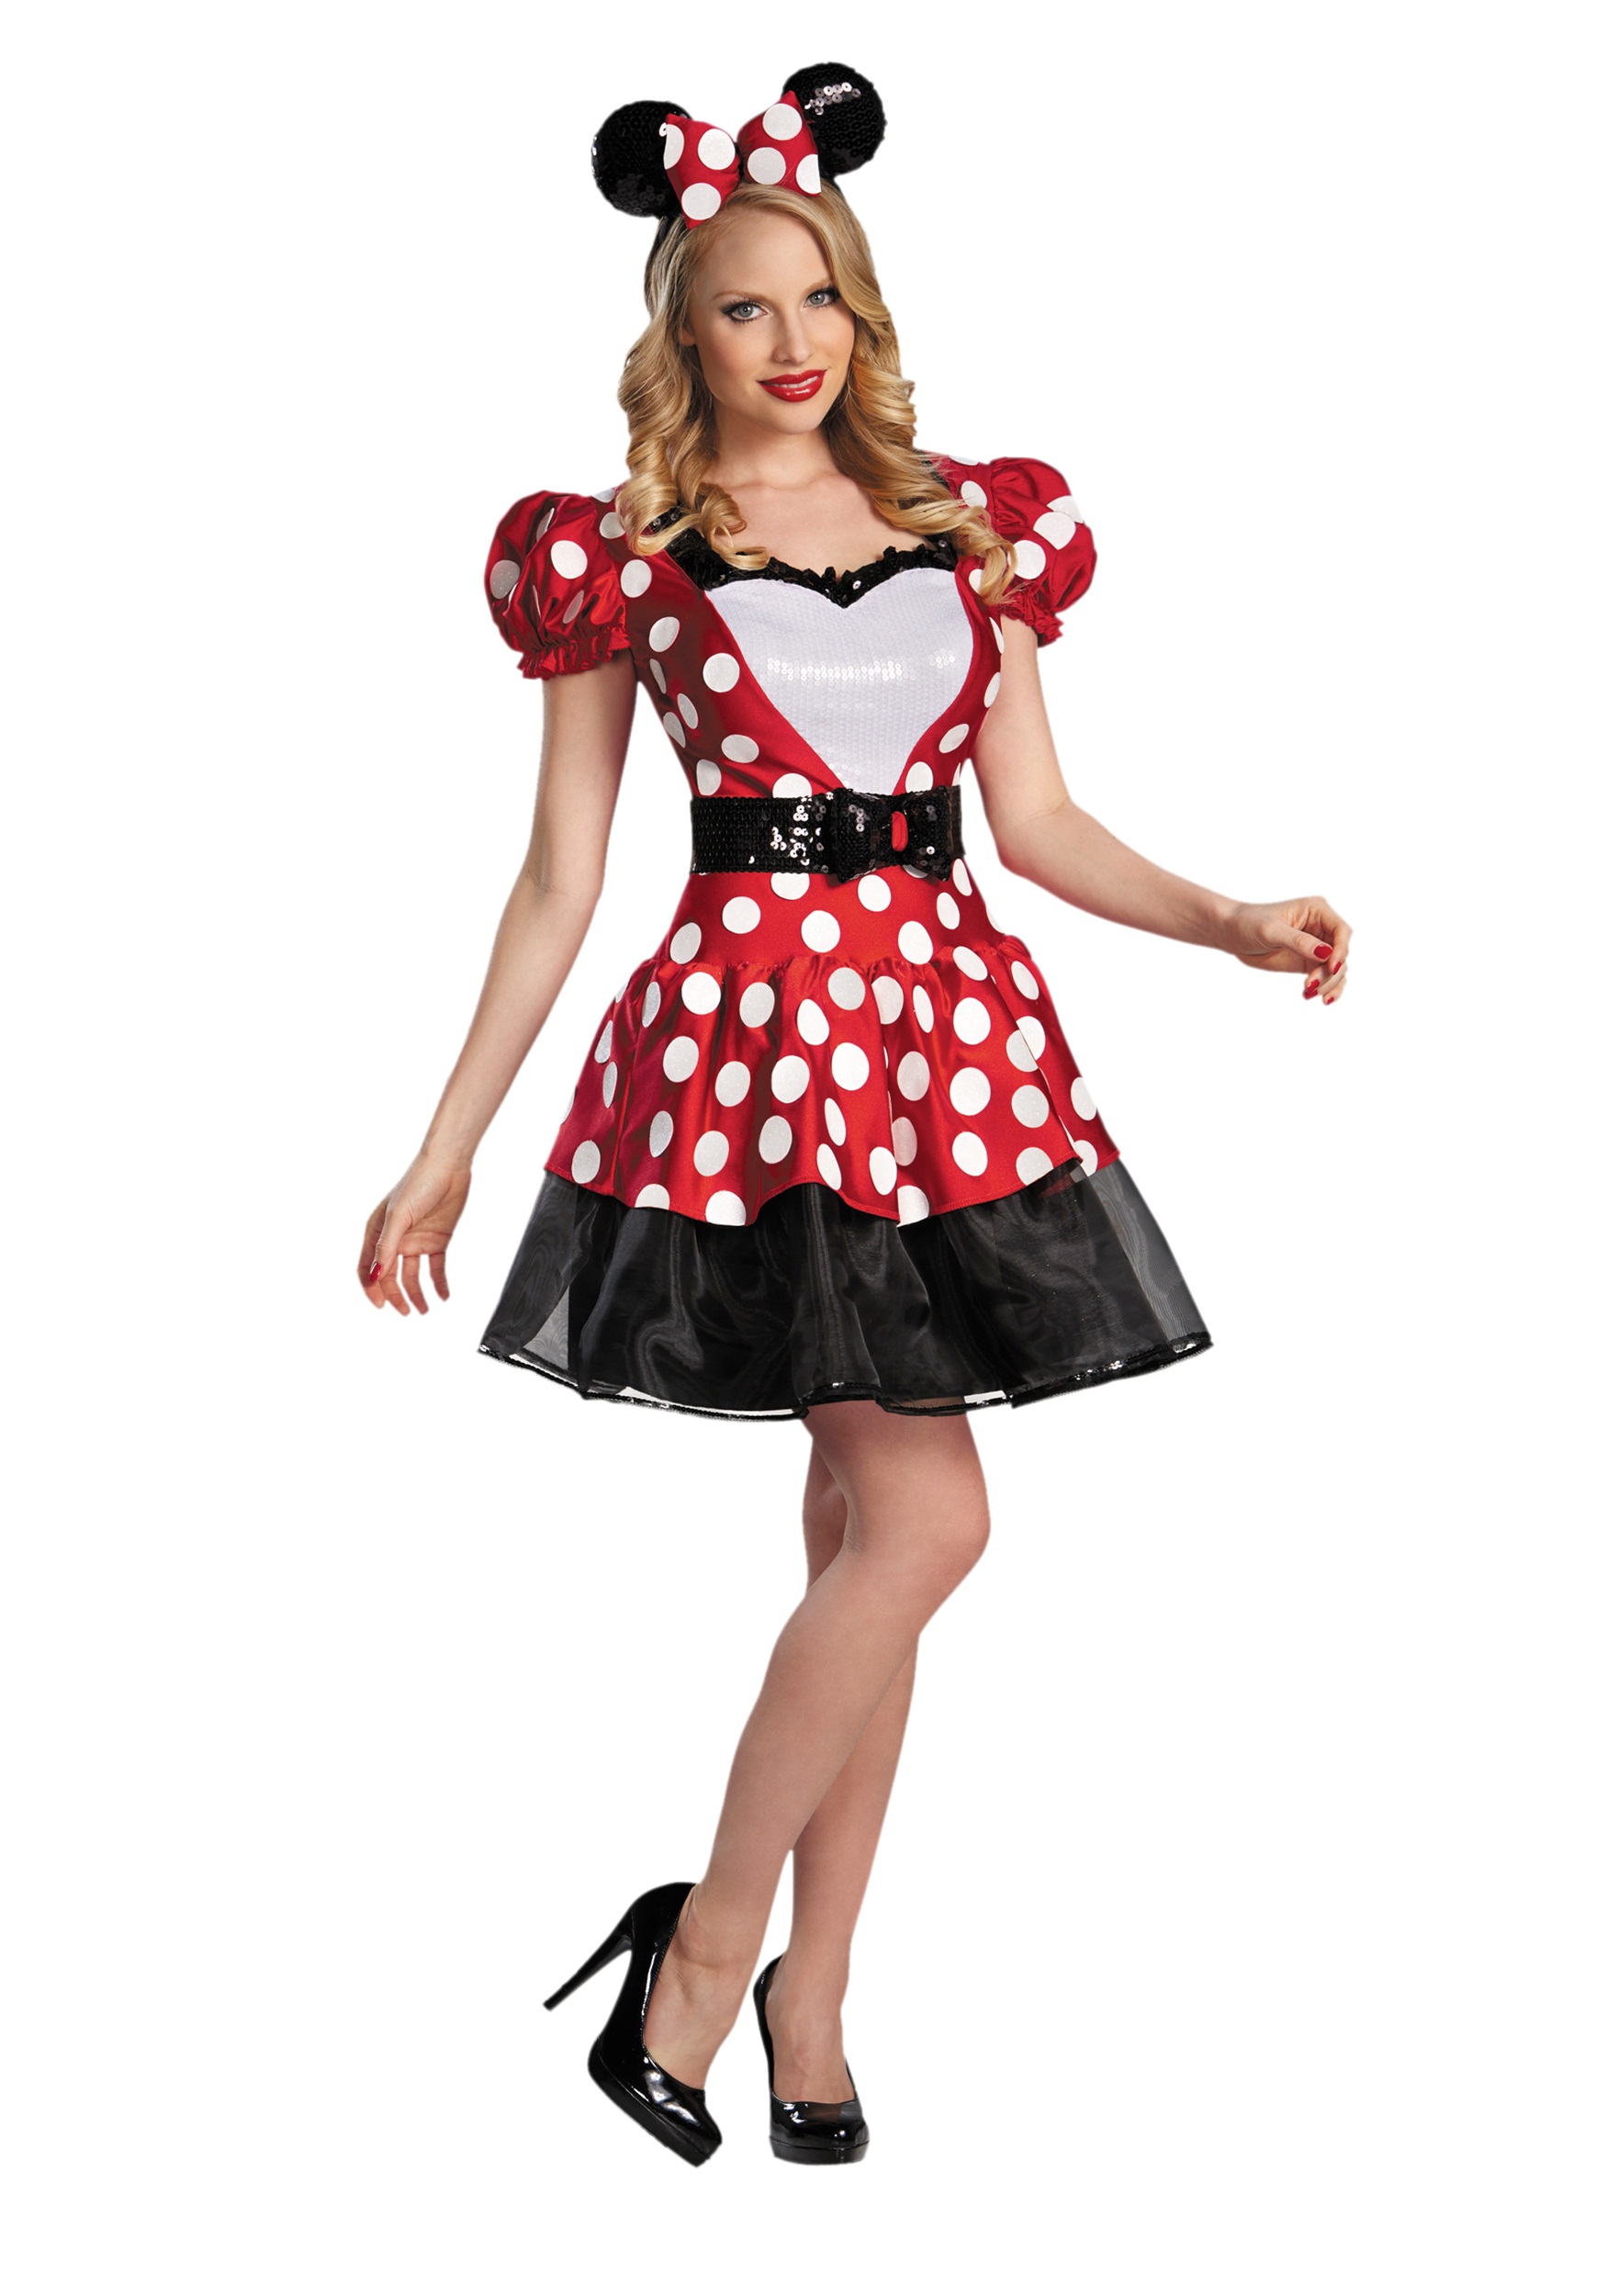 Photos - Fancy Dress Disguise Red Glam Minnie Costume Black/Red/White DI67699